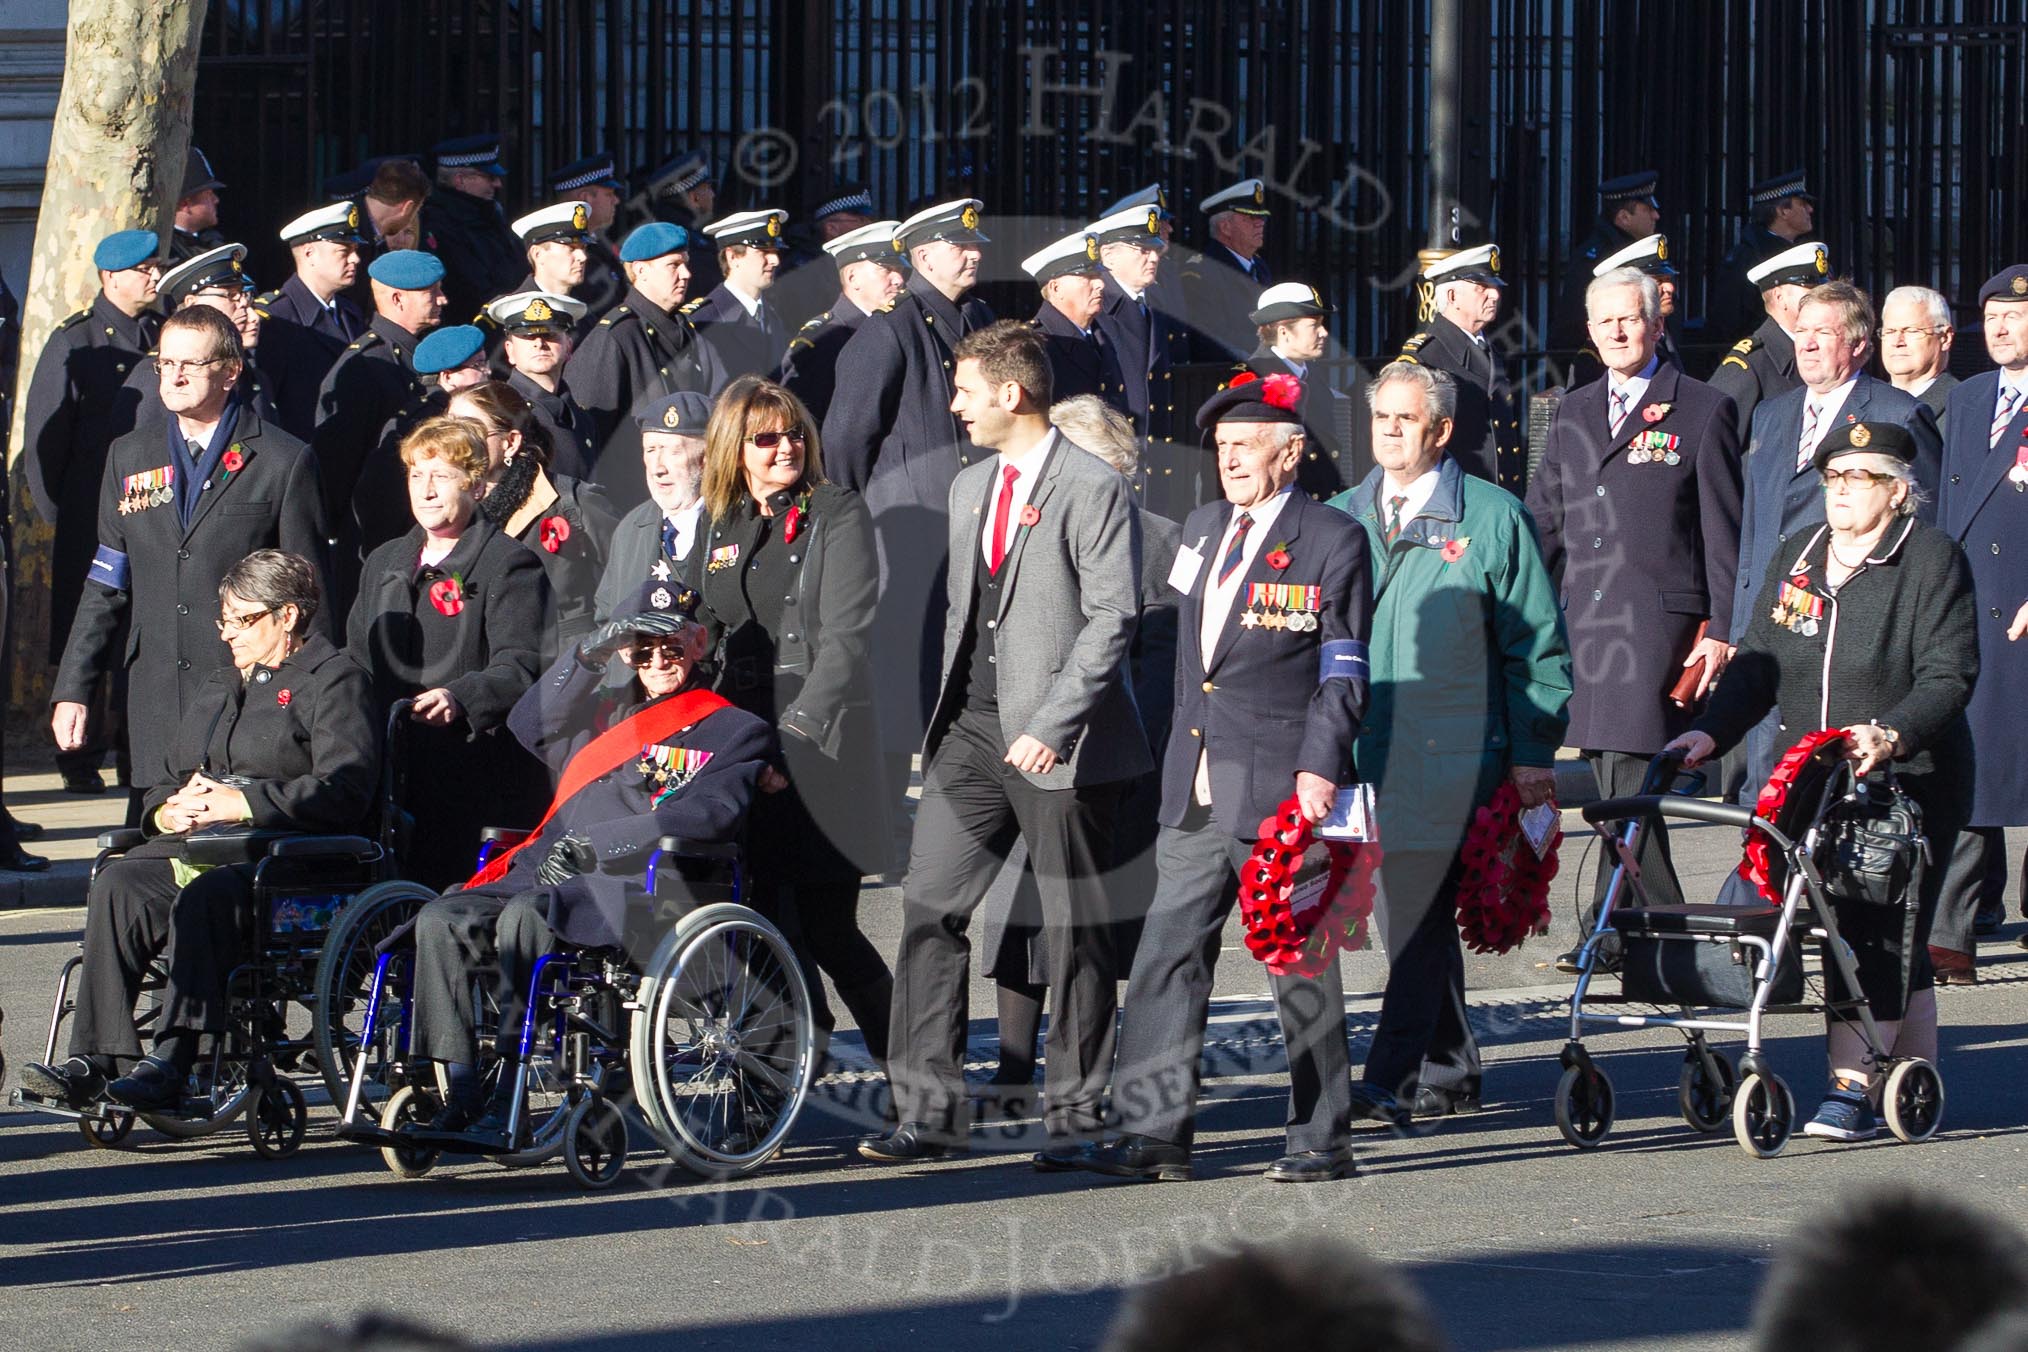 Remembrance Sunday 2012 Cenotaph March Past: Group F12 - Monte Cassino Society..
Whitehall, Cenotaph,
London SW1,

United Kingdom,
on 11 November 2012 at 11:46, image #466